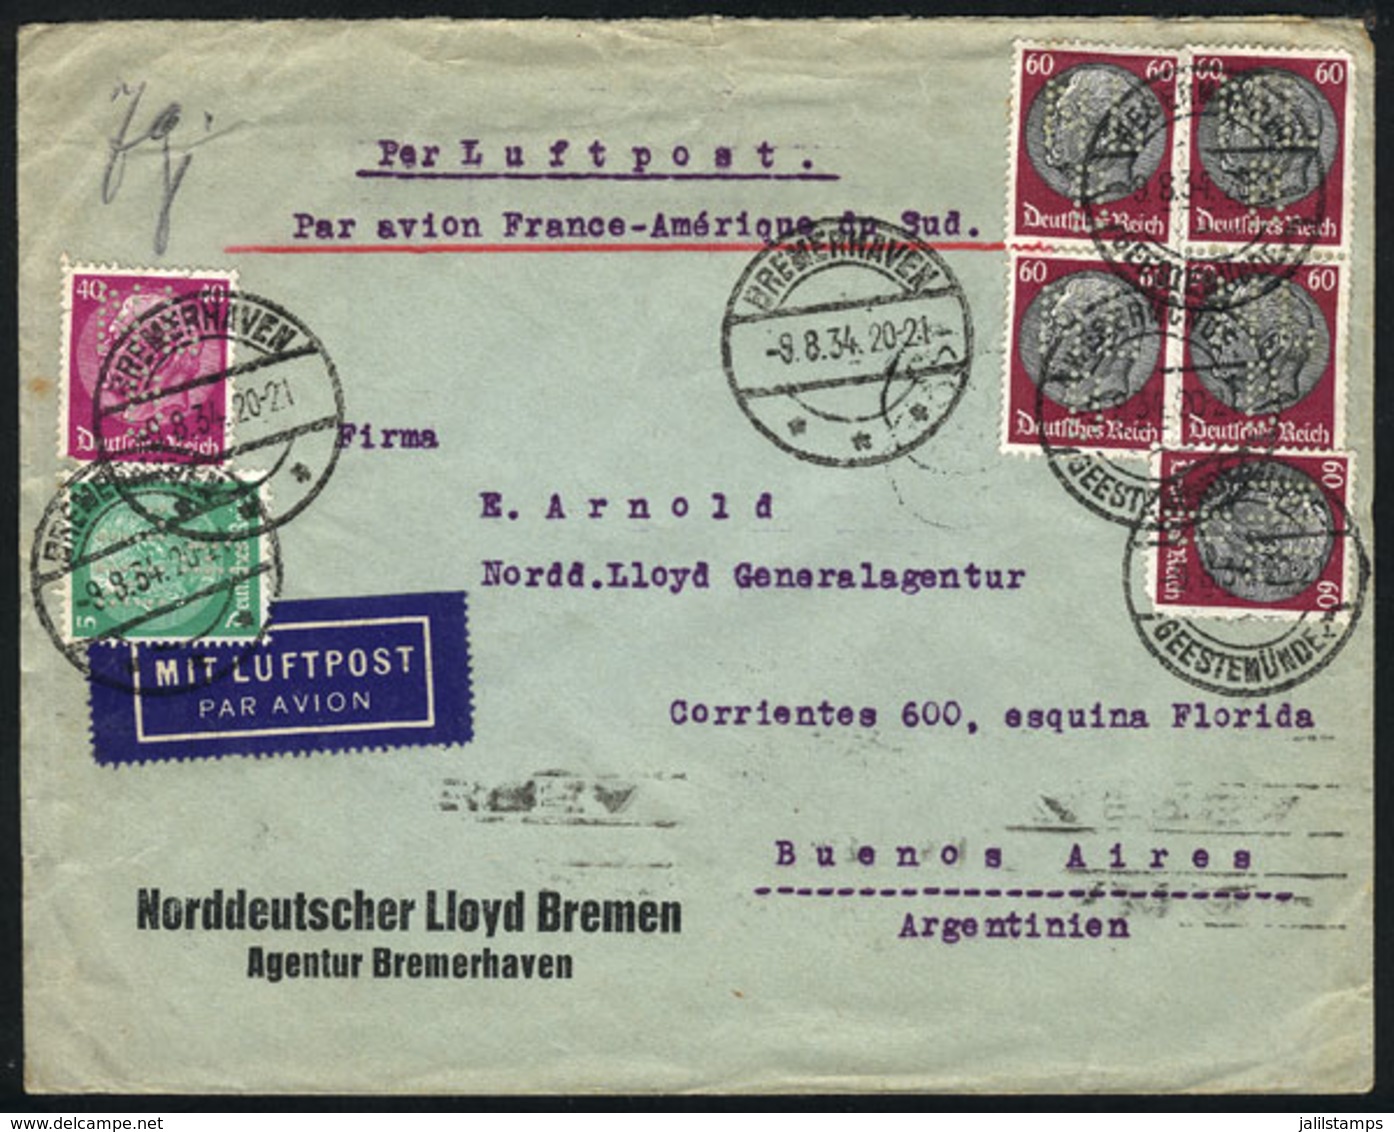 GERMANY: Airmail Cover Sent By Air France From Bremerhaven To Argentina On 9/AU/1934 Franked With 3.45Mk., All The Stamp - Vorphilatelie